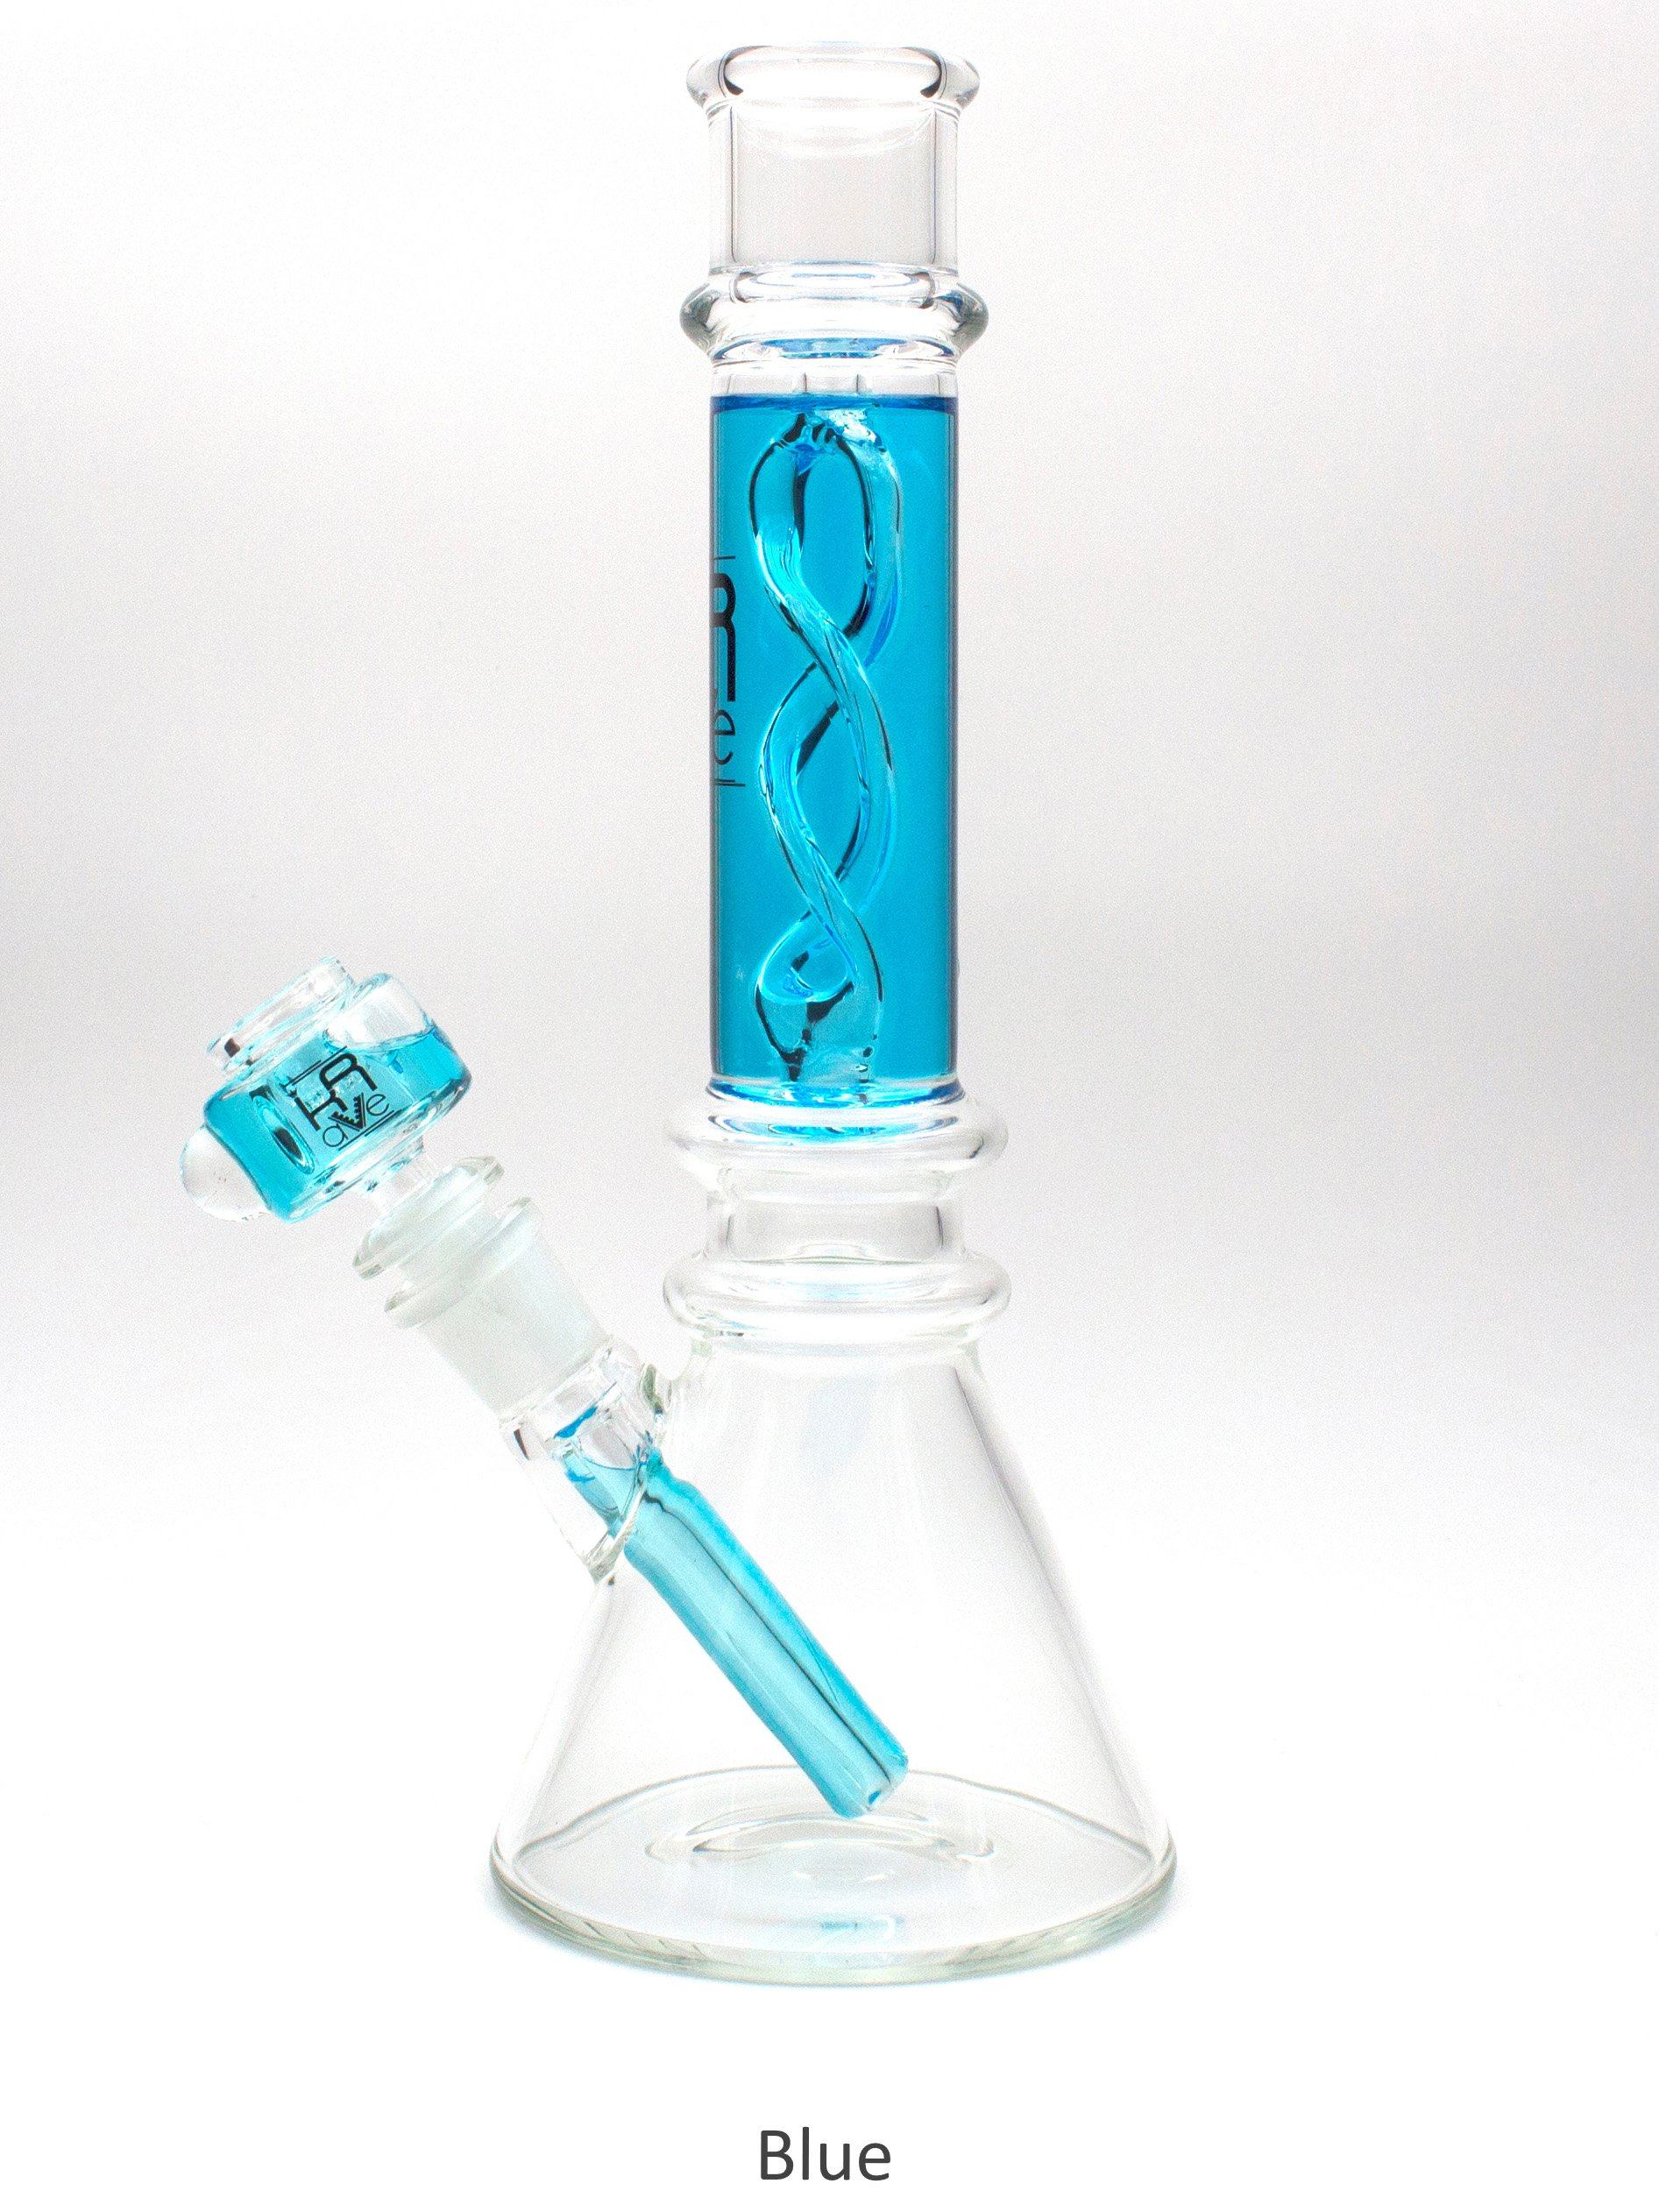 Krave Glass DNA Flower Power Packages 